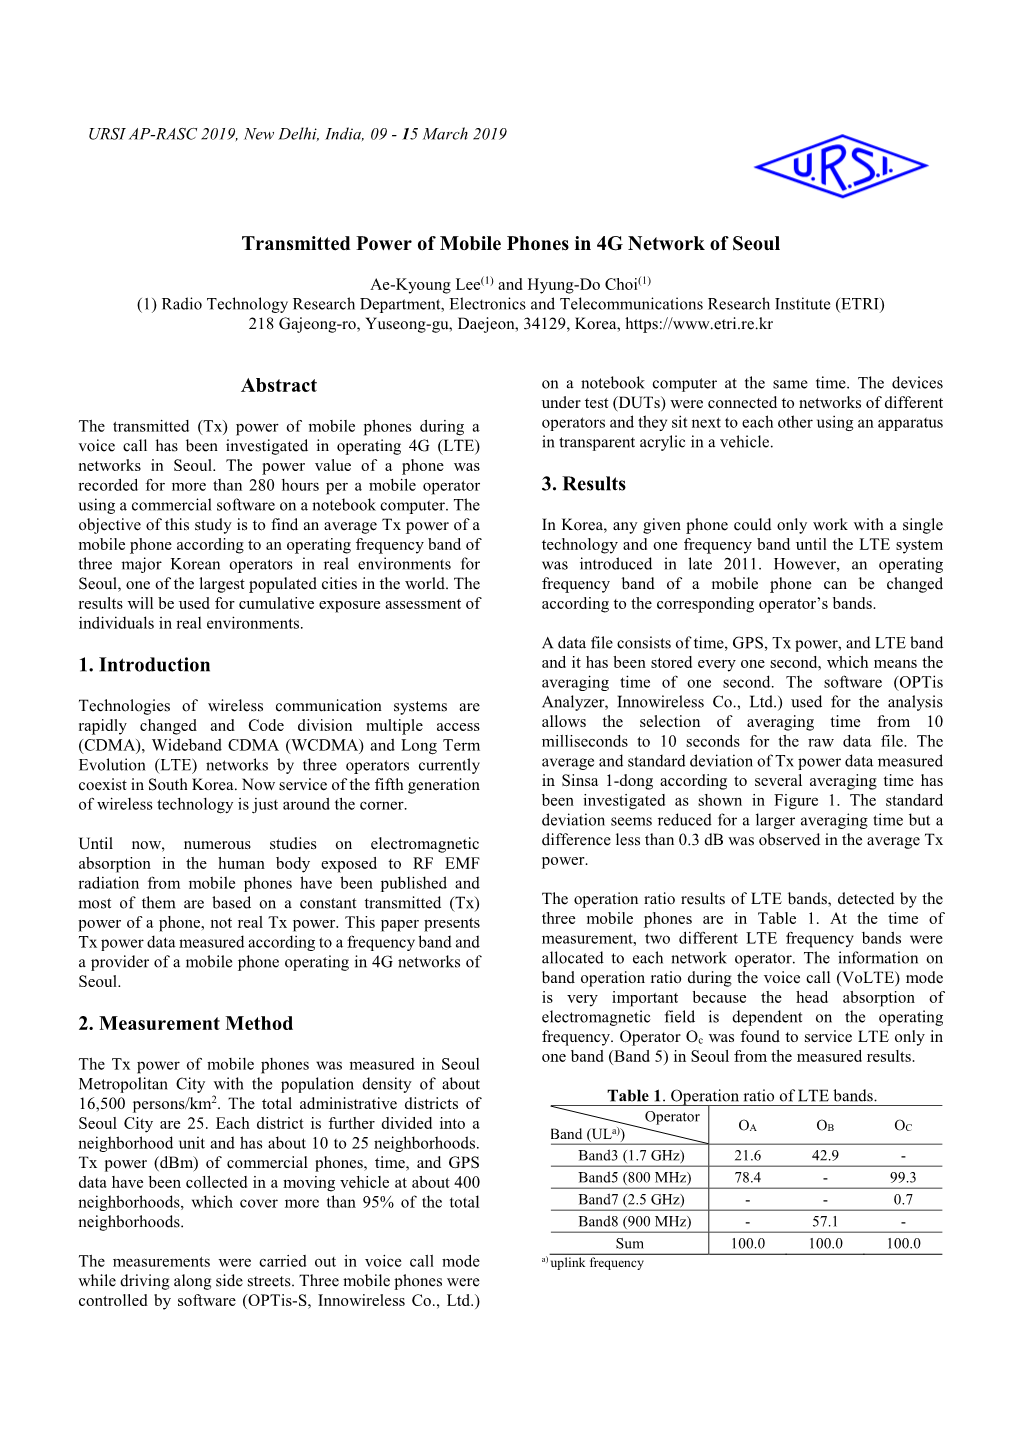 Transmitted Power of Mobile Phones in 4G Network of Seoul Abstract 1. Introduction 2. Measurement Method 3. Results